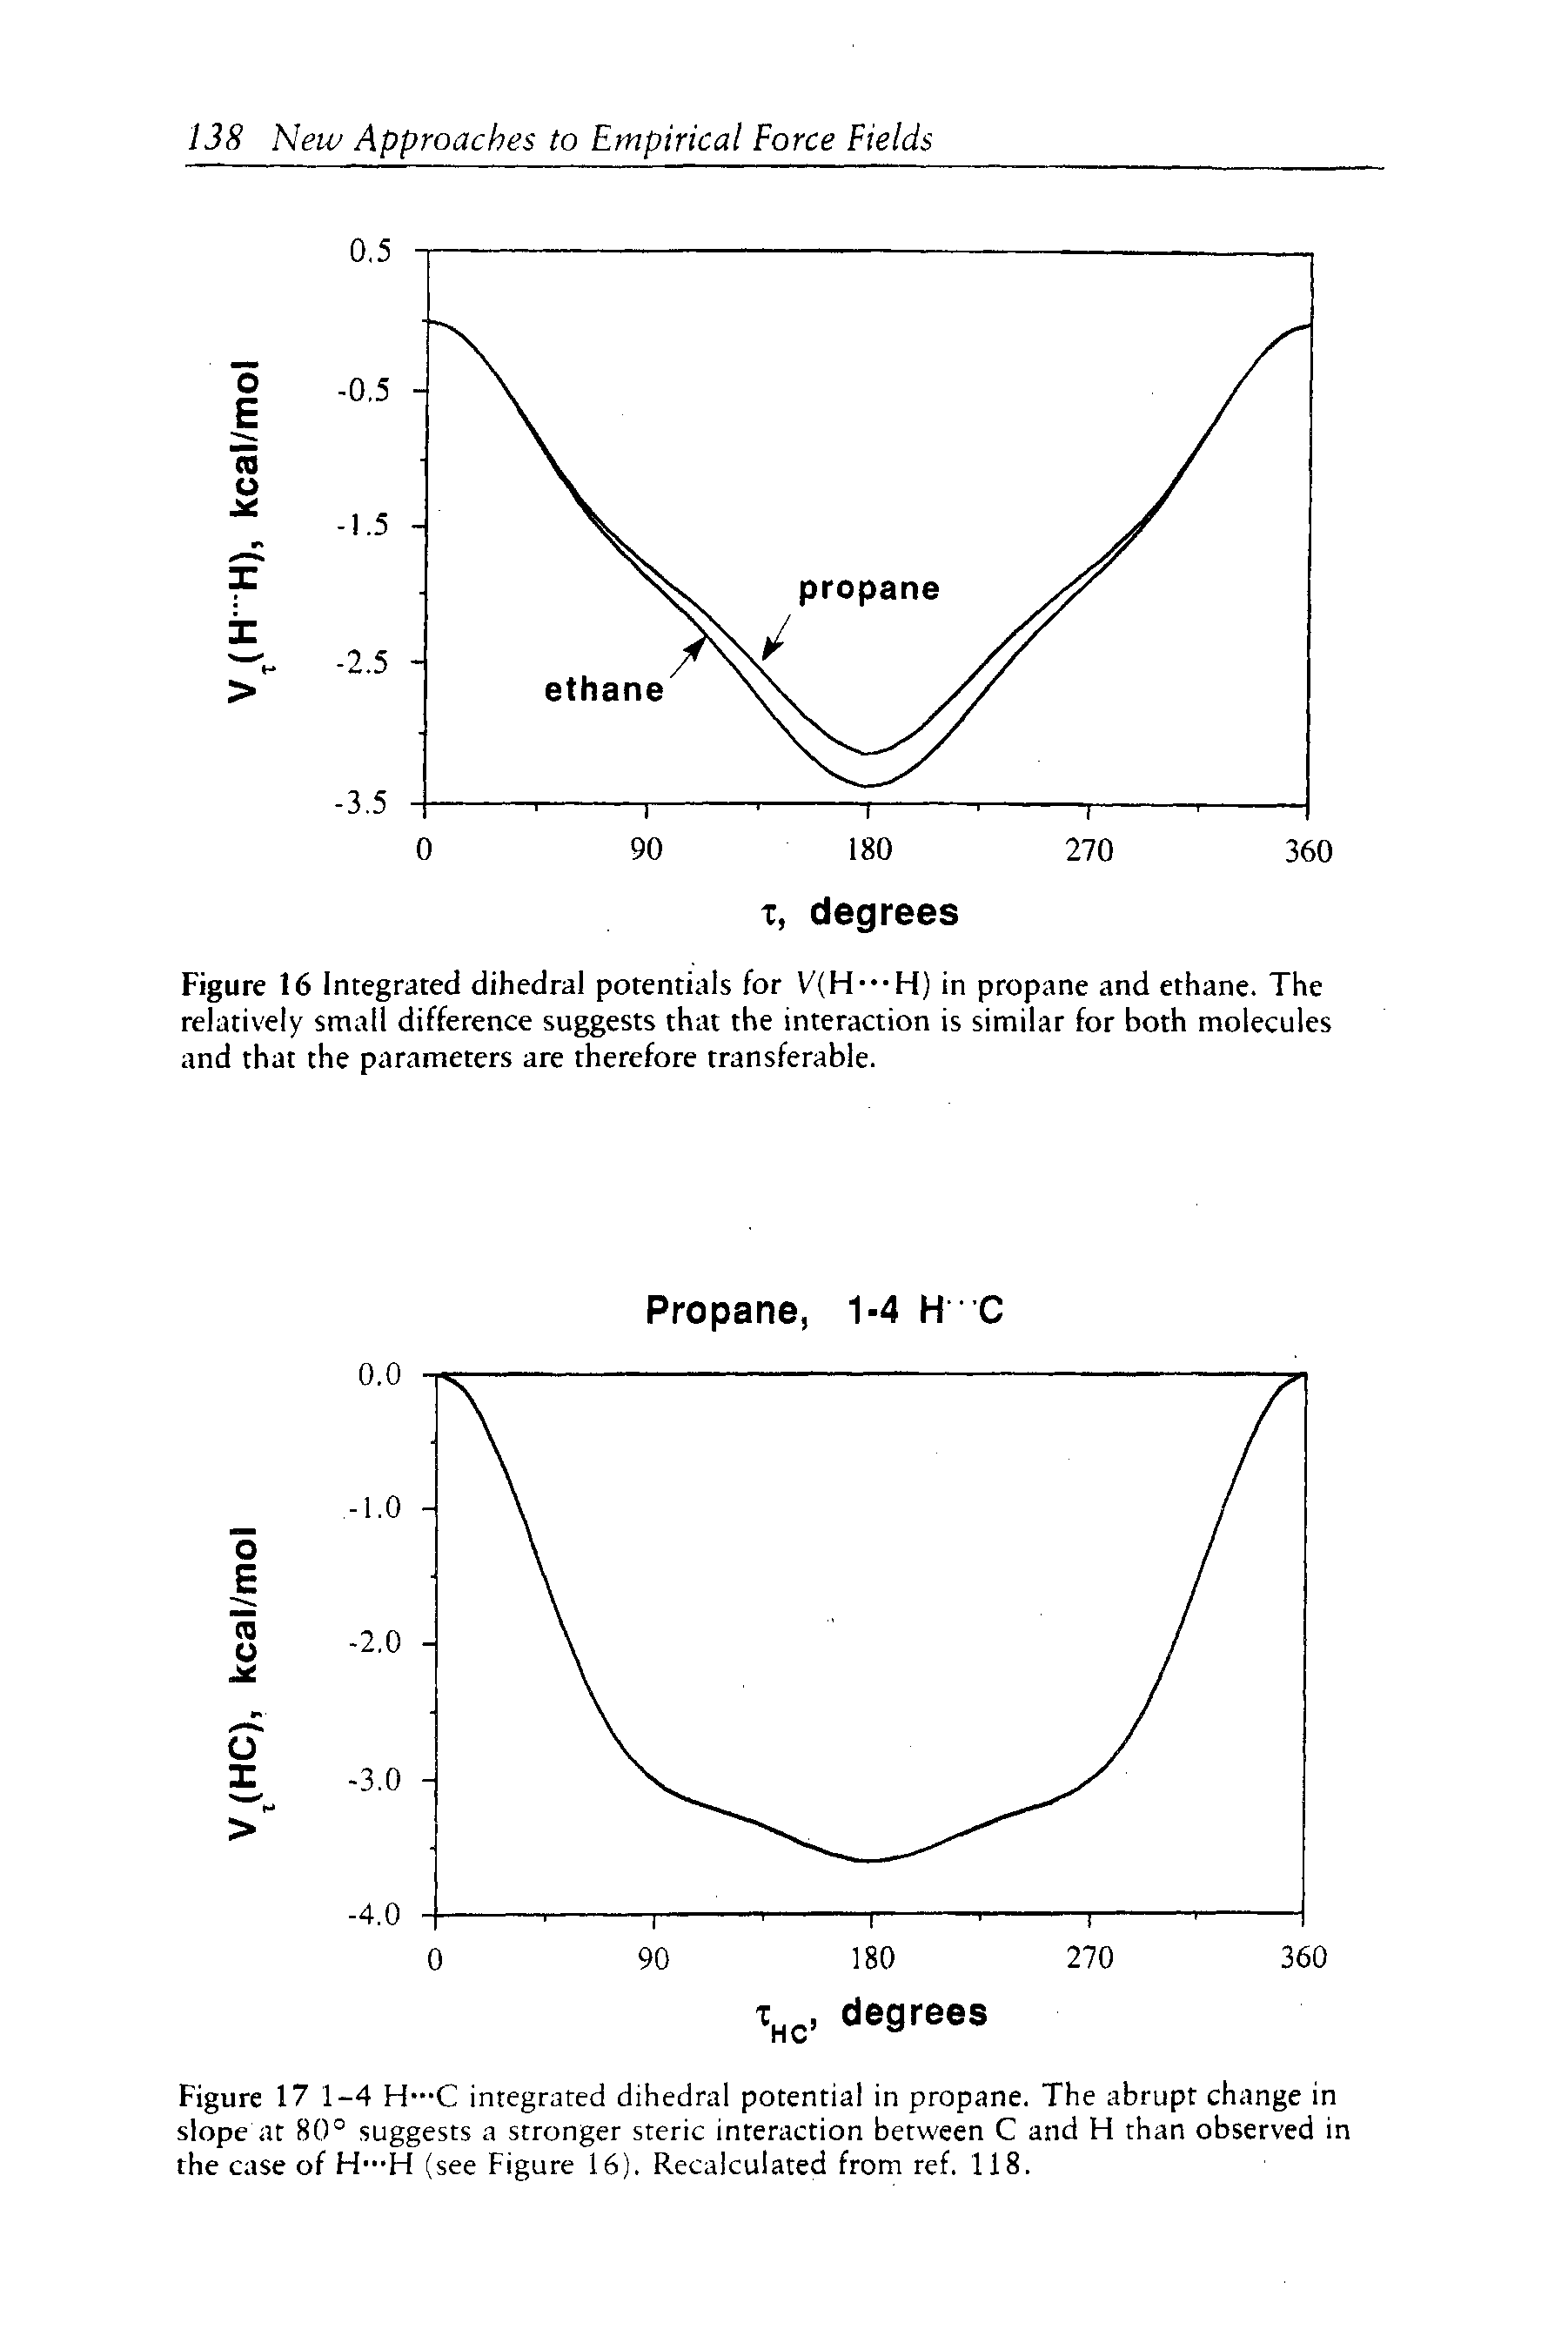 Figure 17 1-4 H--C integrated dihedral potential in propane. The abrupt change in slope at 80° suggests a stronger steric interaction between C and H than observed in the case of H-"H (see Figure 16). Recalculated from ref. 118.